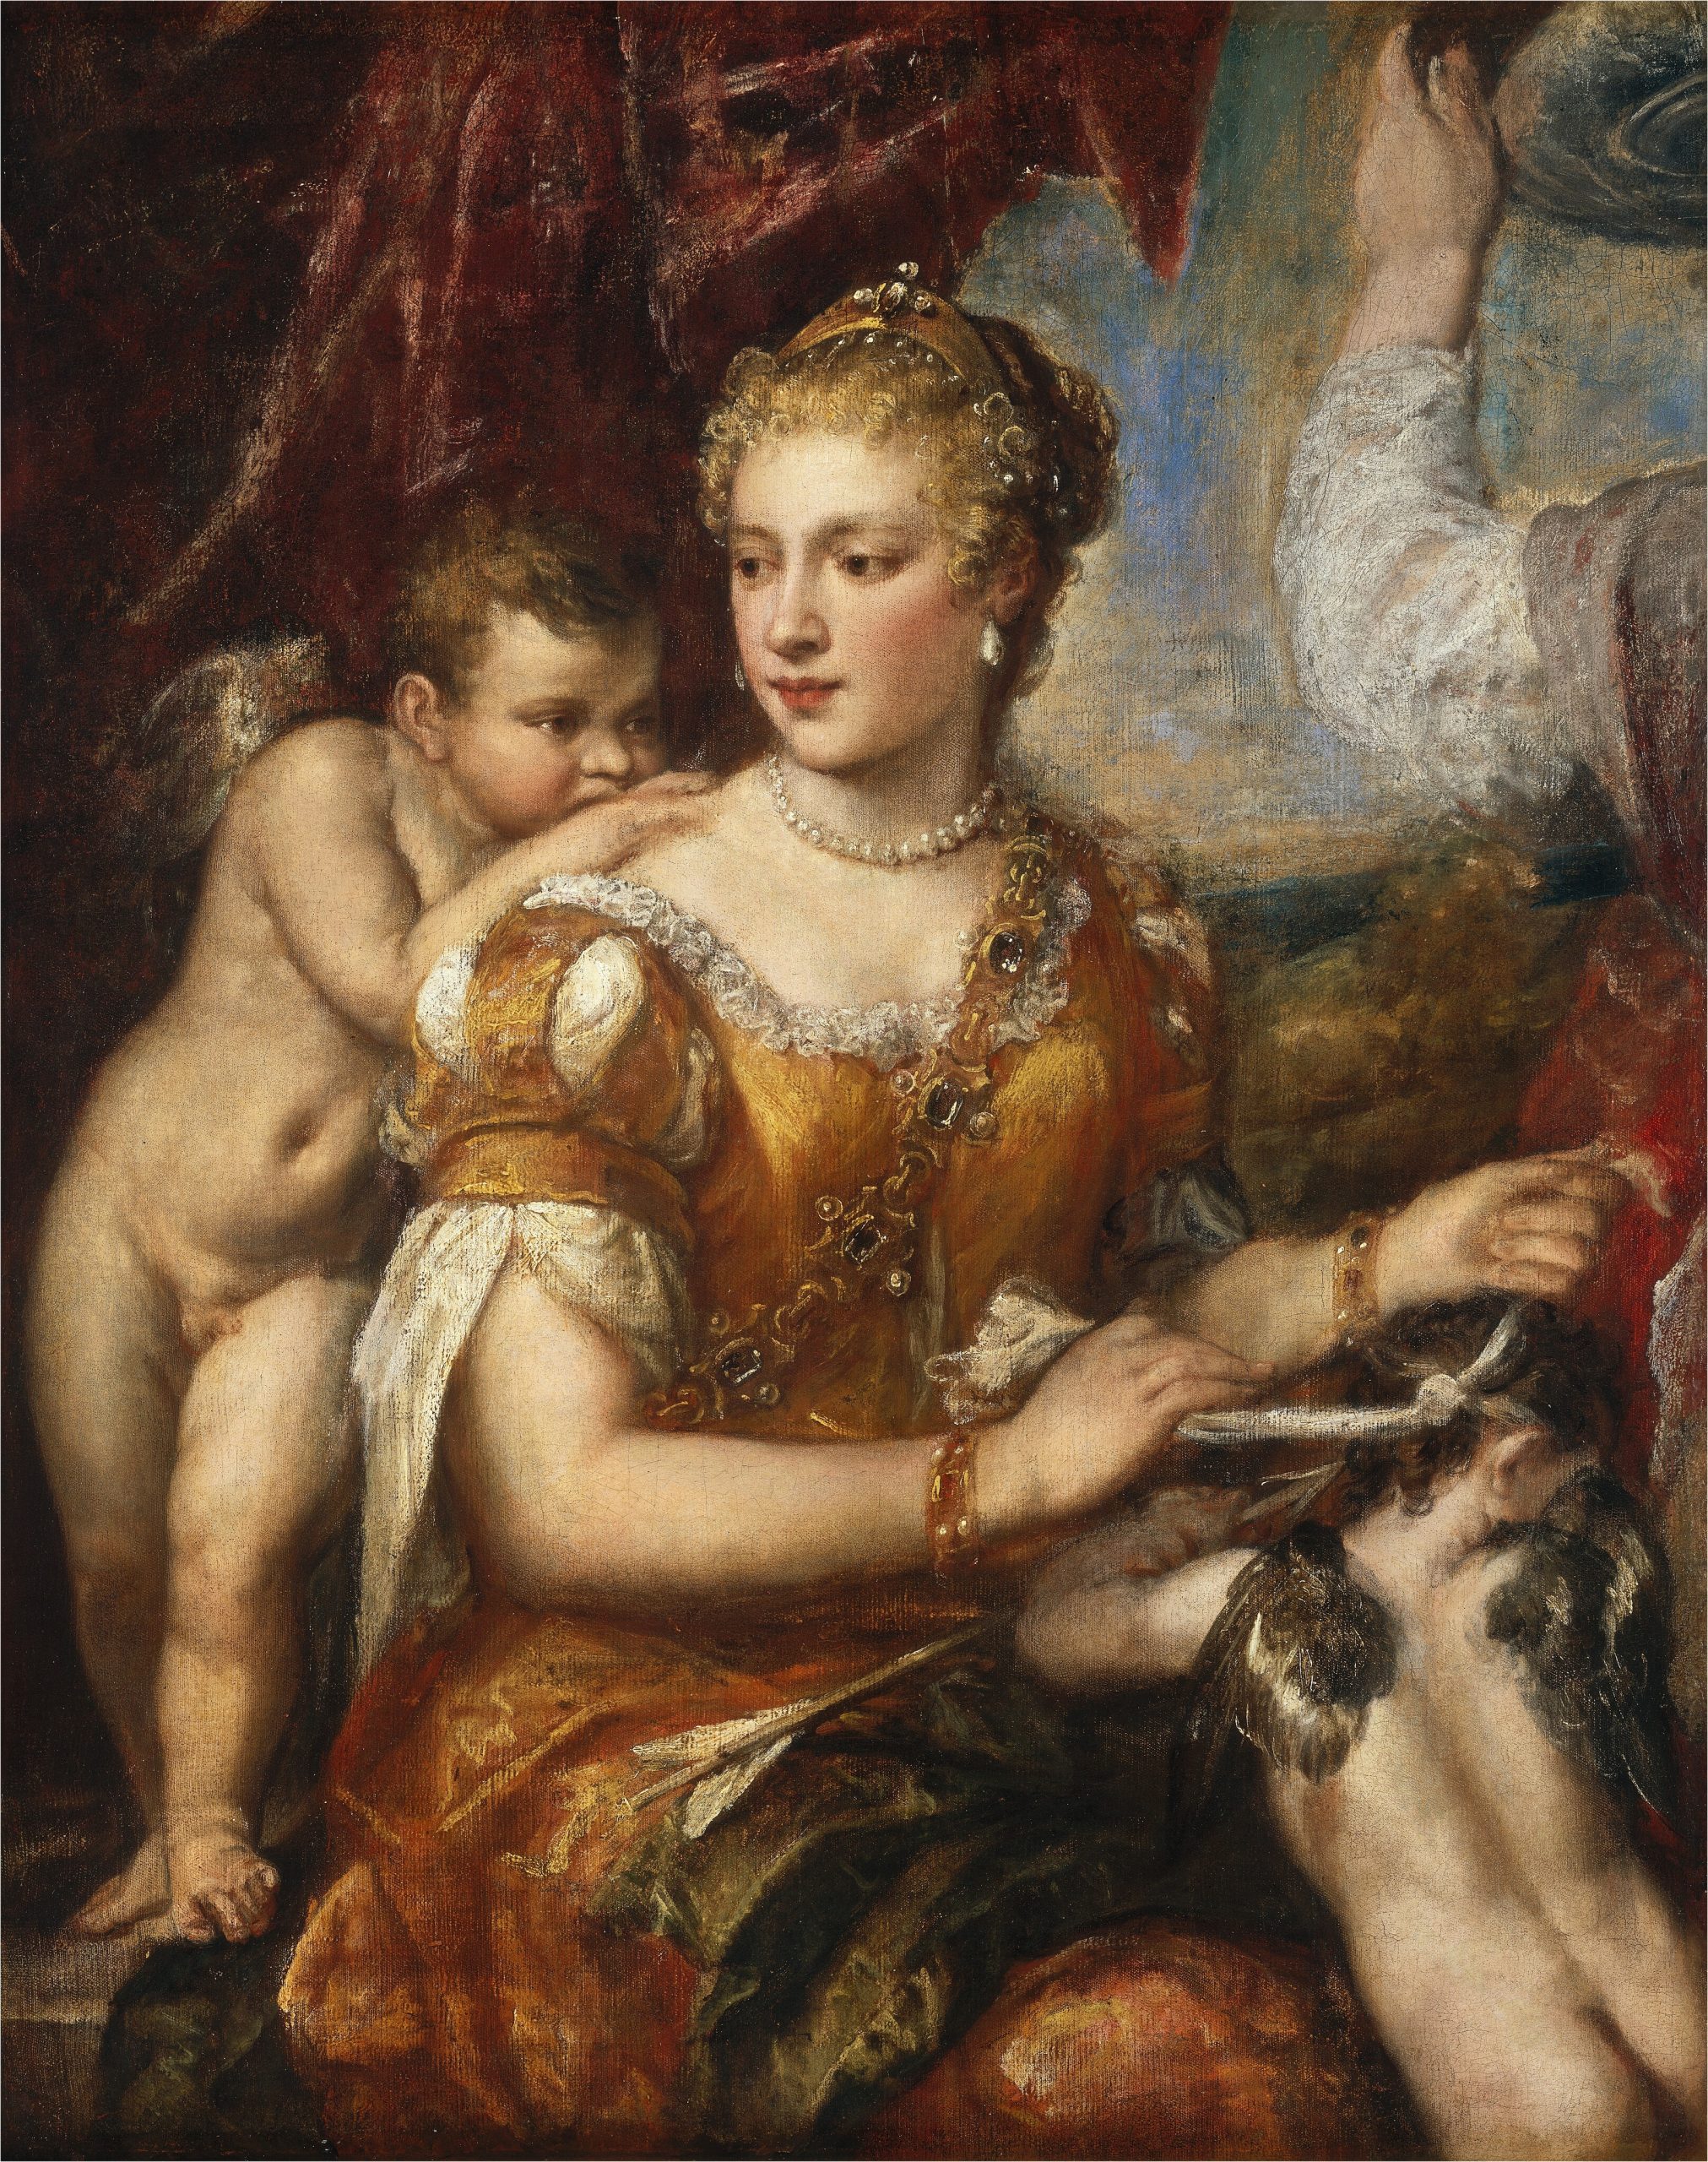 A painting of Venus surrounded by cherubs. Venus is blindfolding Cupid.